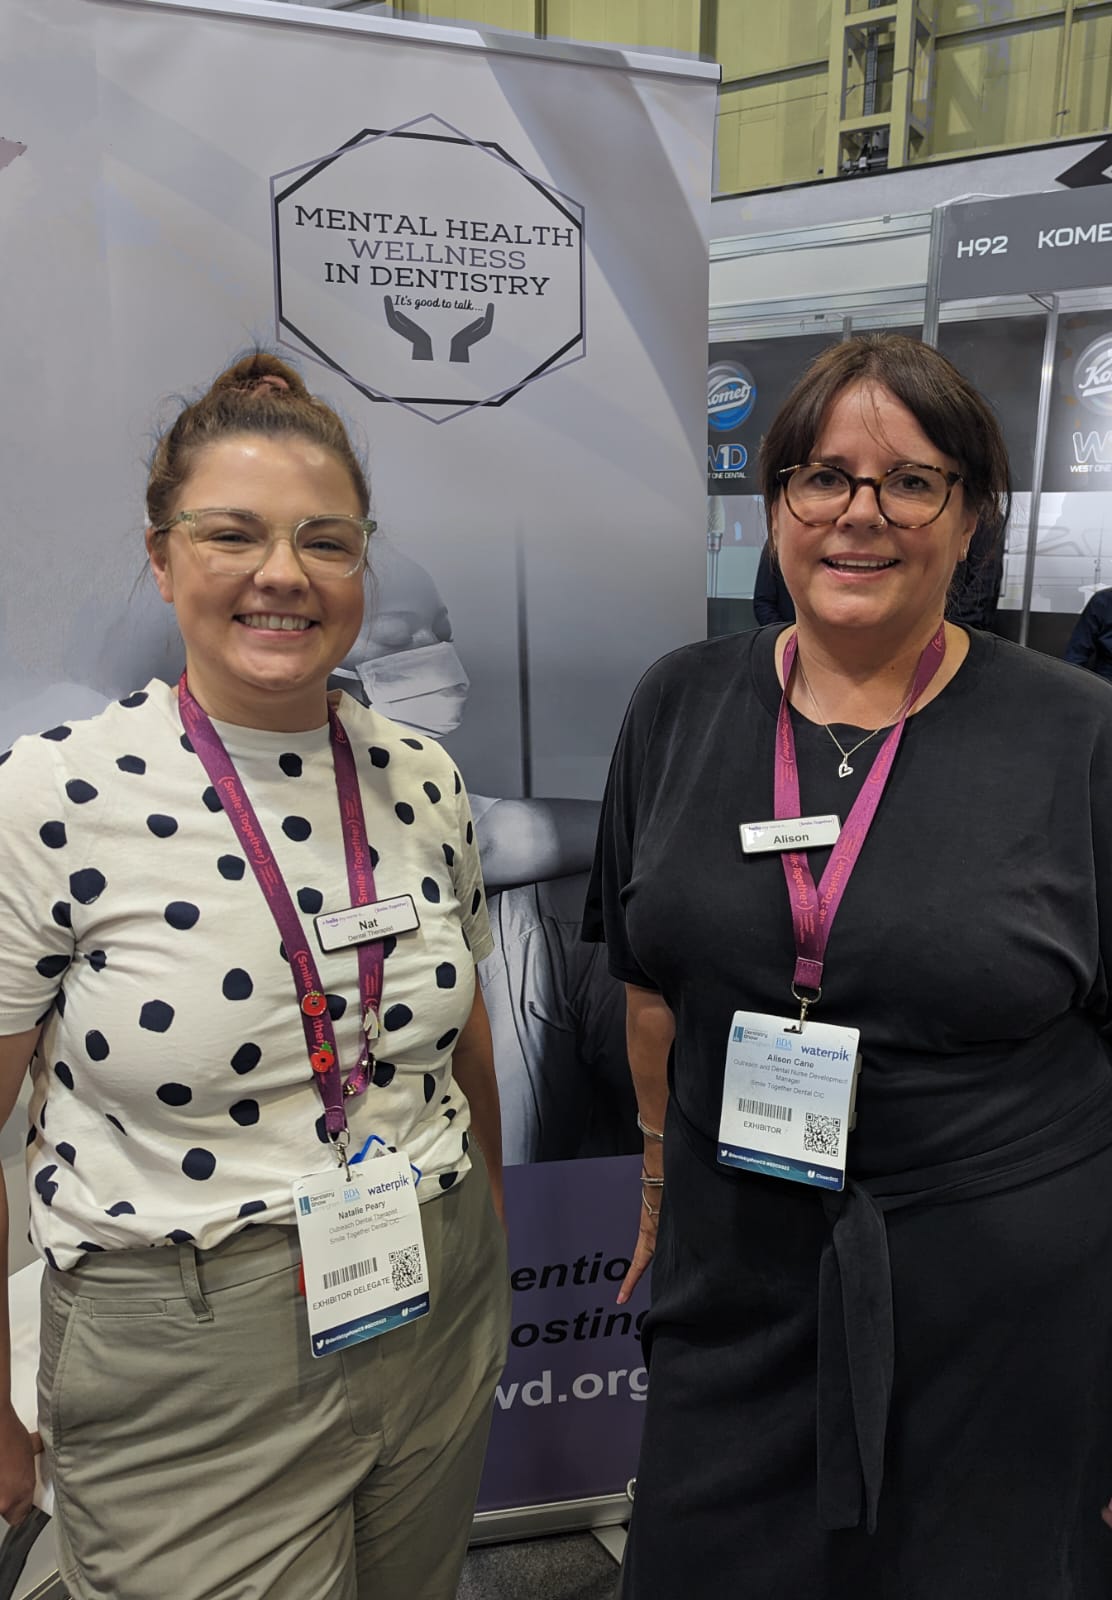 two female colleagues stood in front of 'Mental Health Wellness in Dentistry' poster